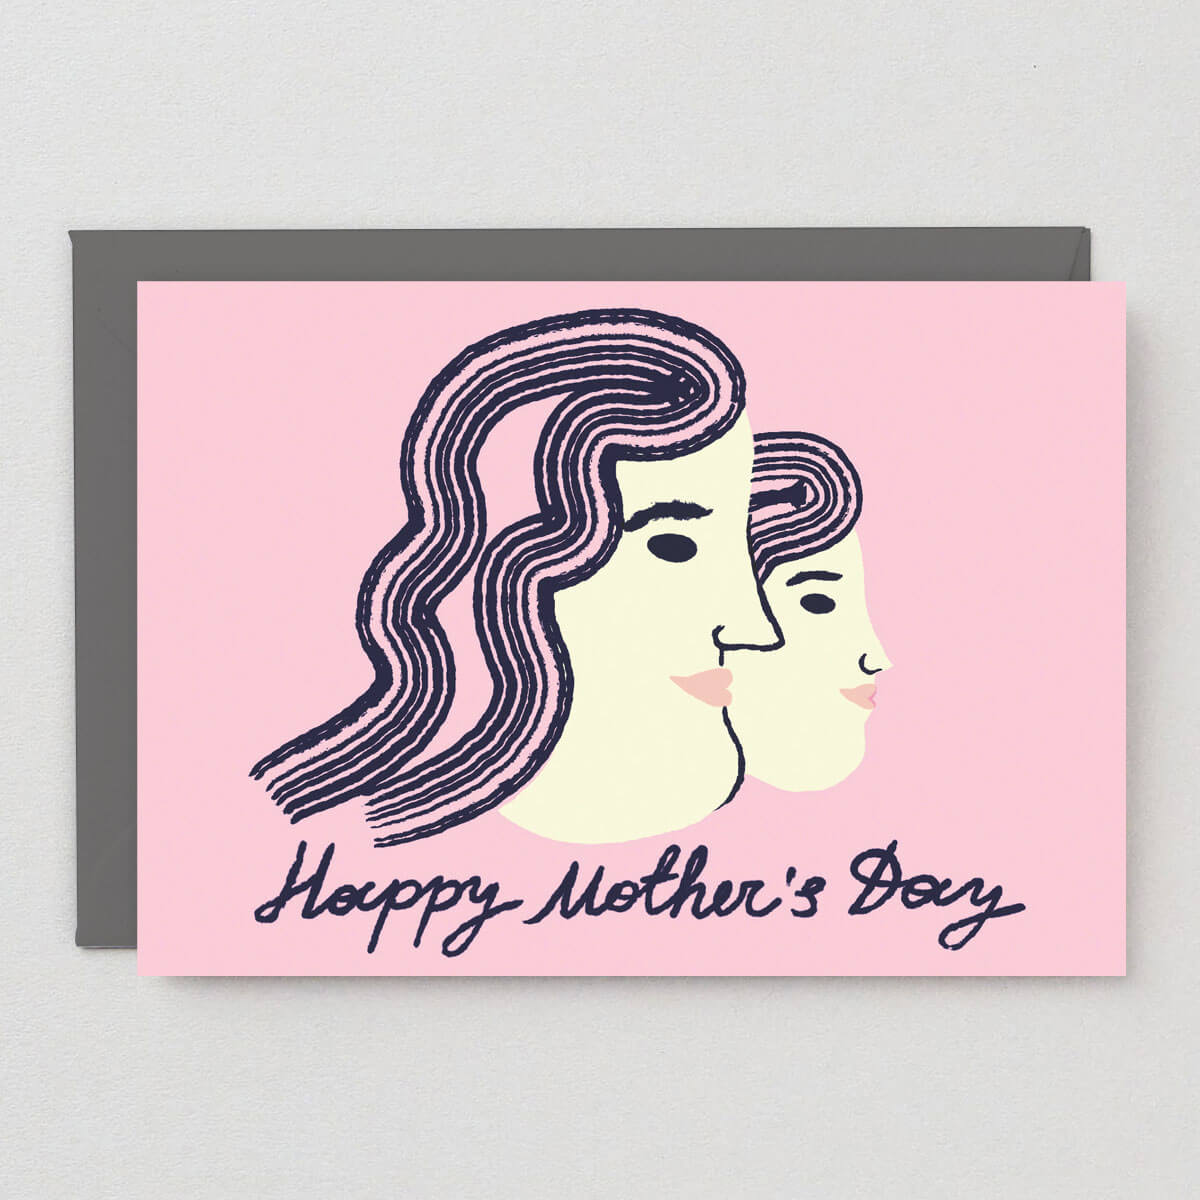 Wrap Magazine - Happy Mother’s Day Card Image 2